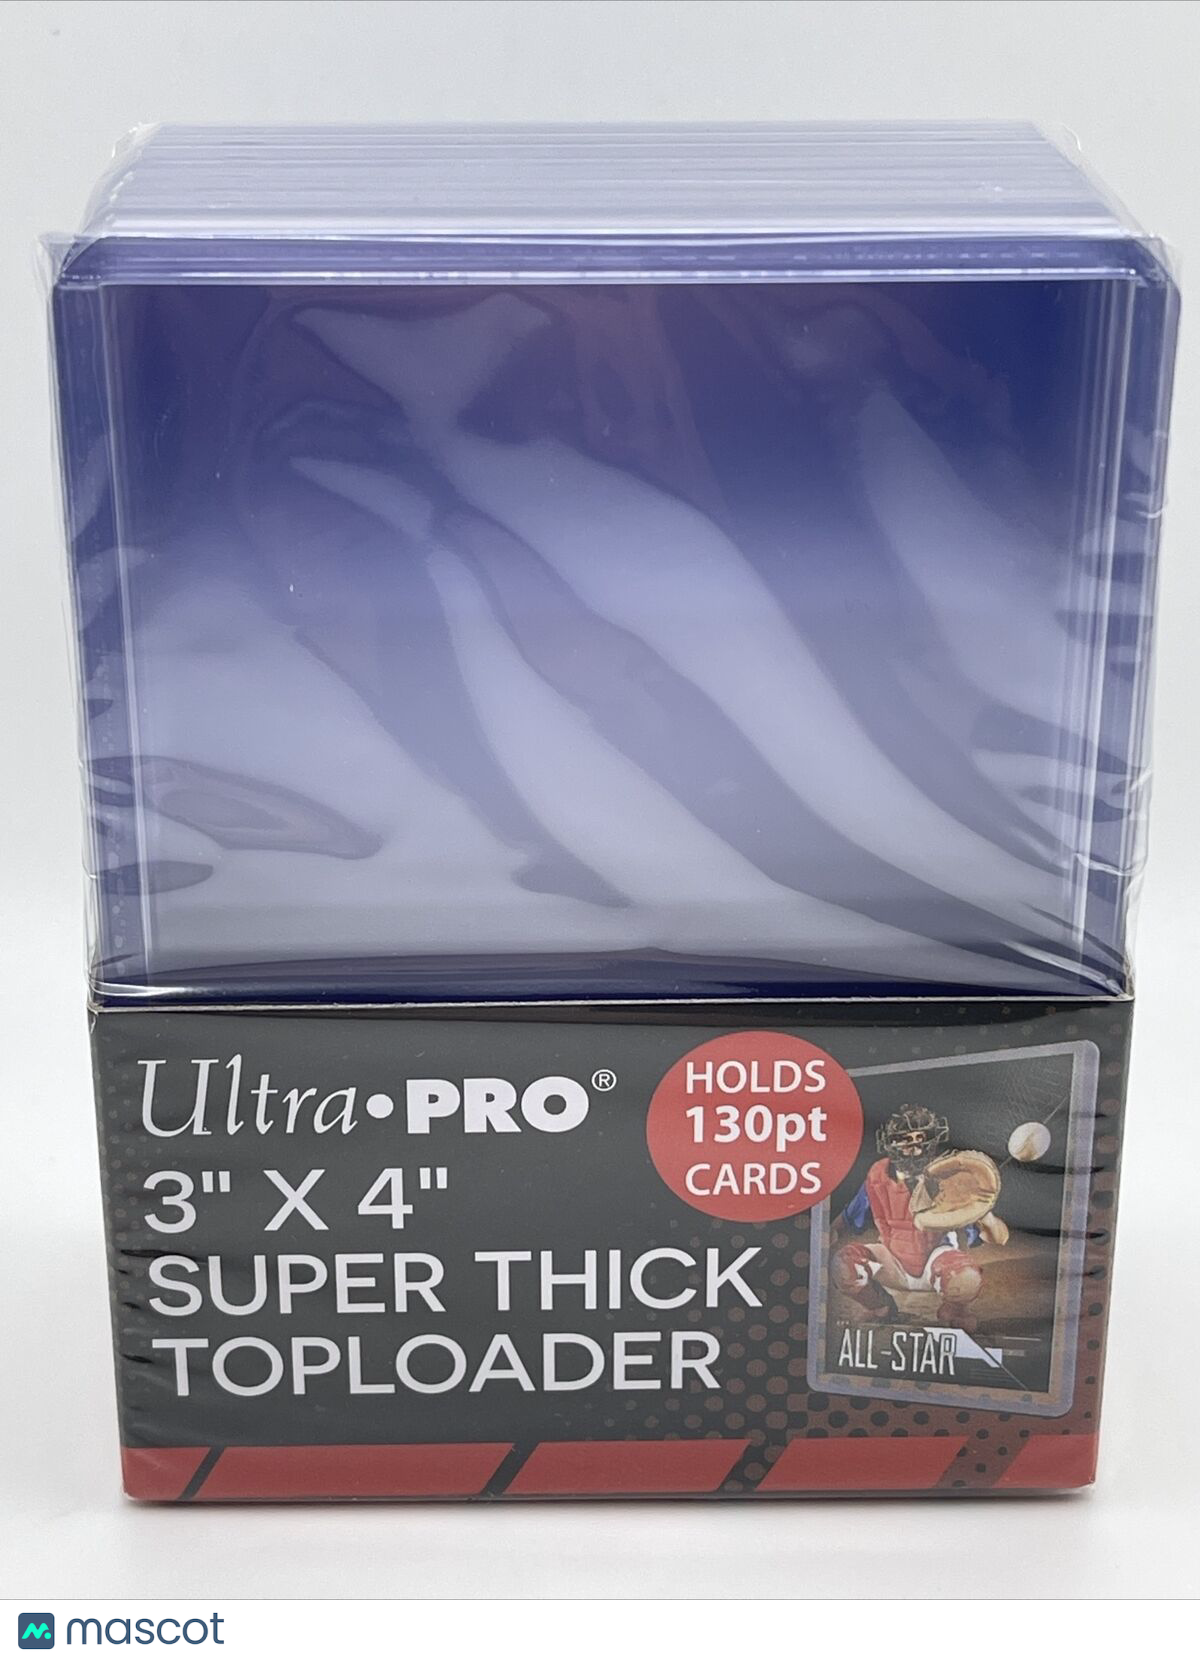 Ultra Pro 3X4 Super Thick Toploaders 130pt Point 1 Pack of 10 for Thick Cards